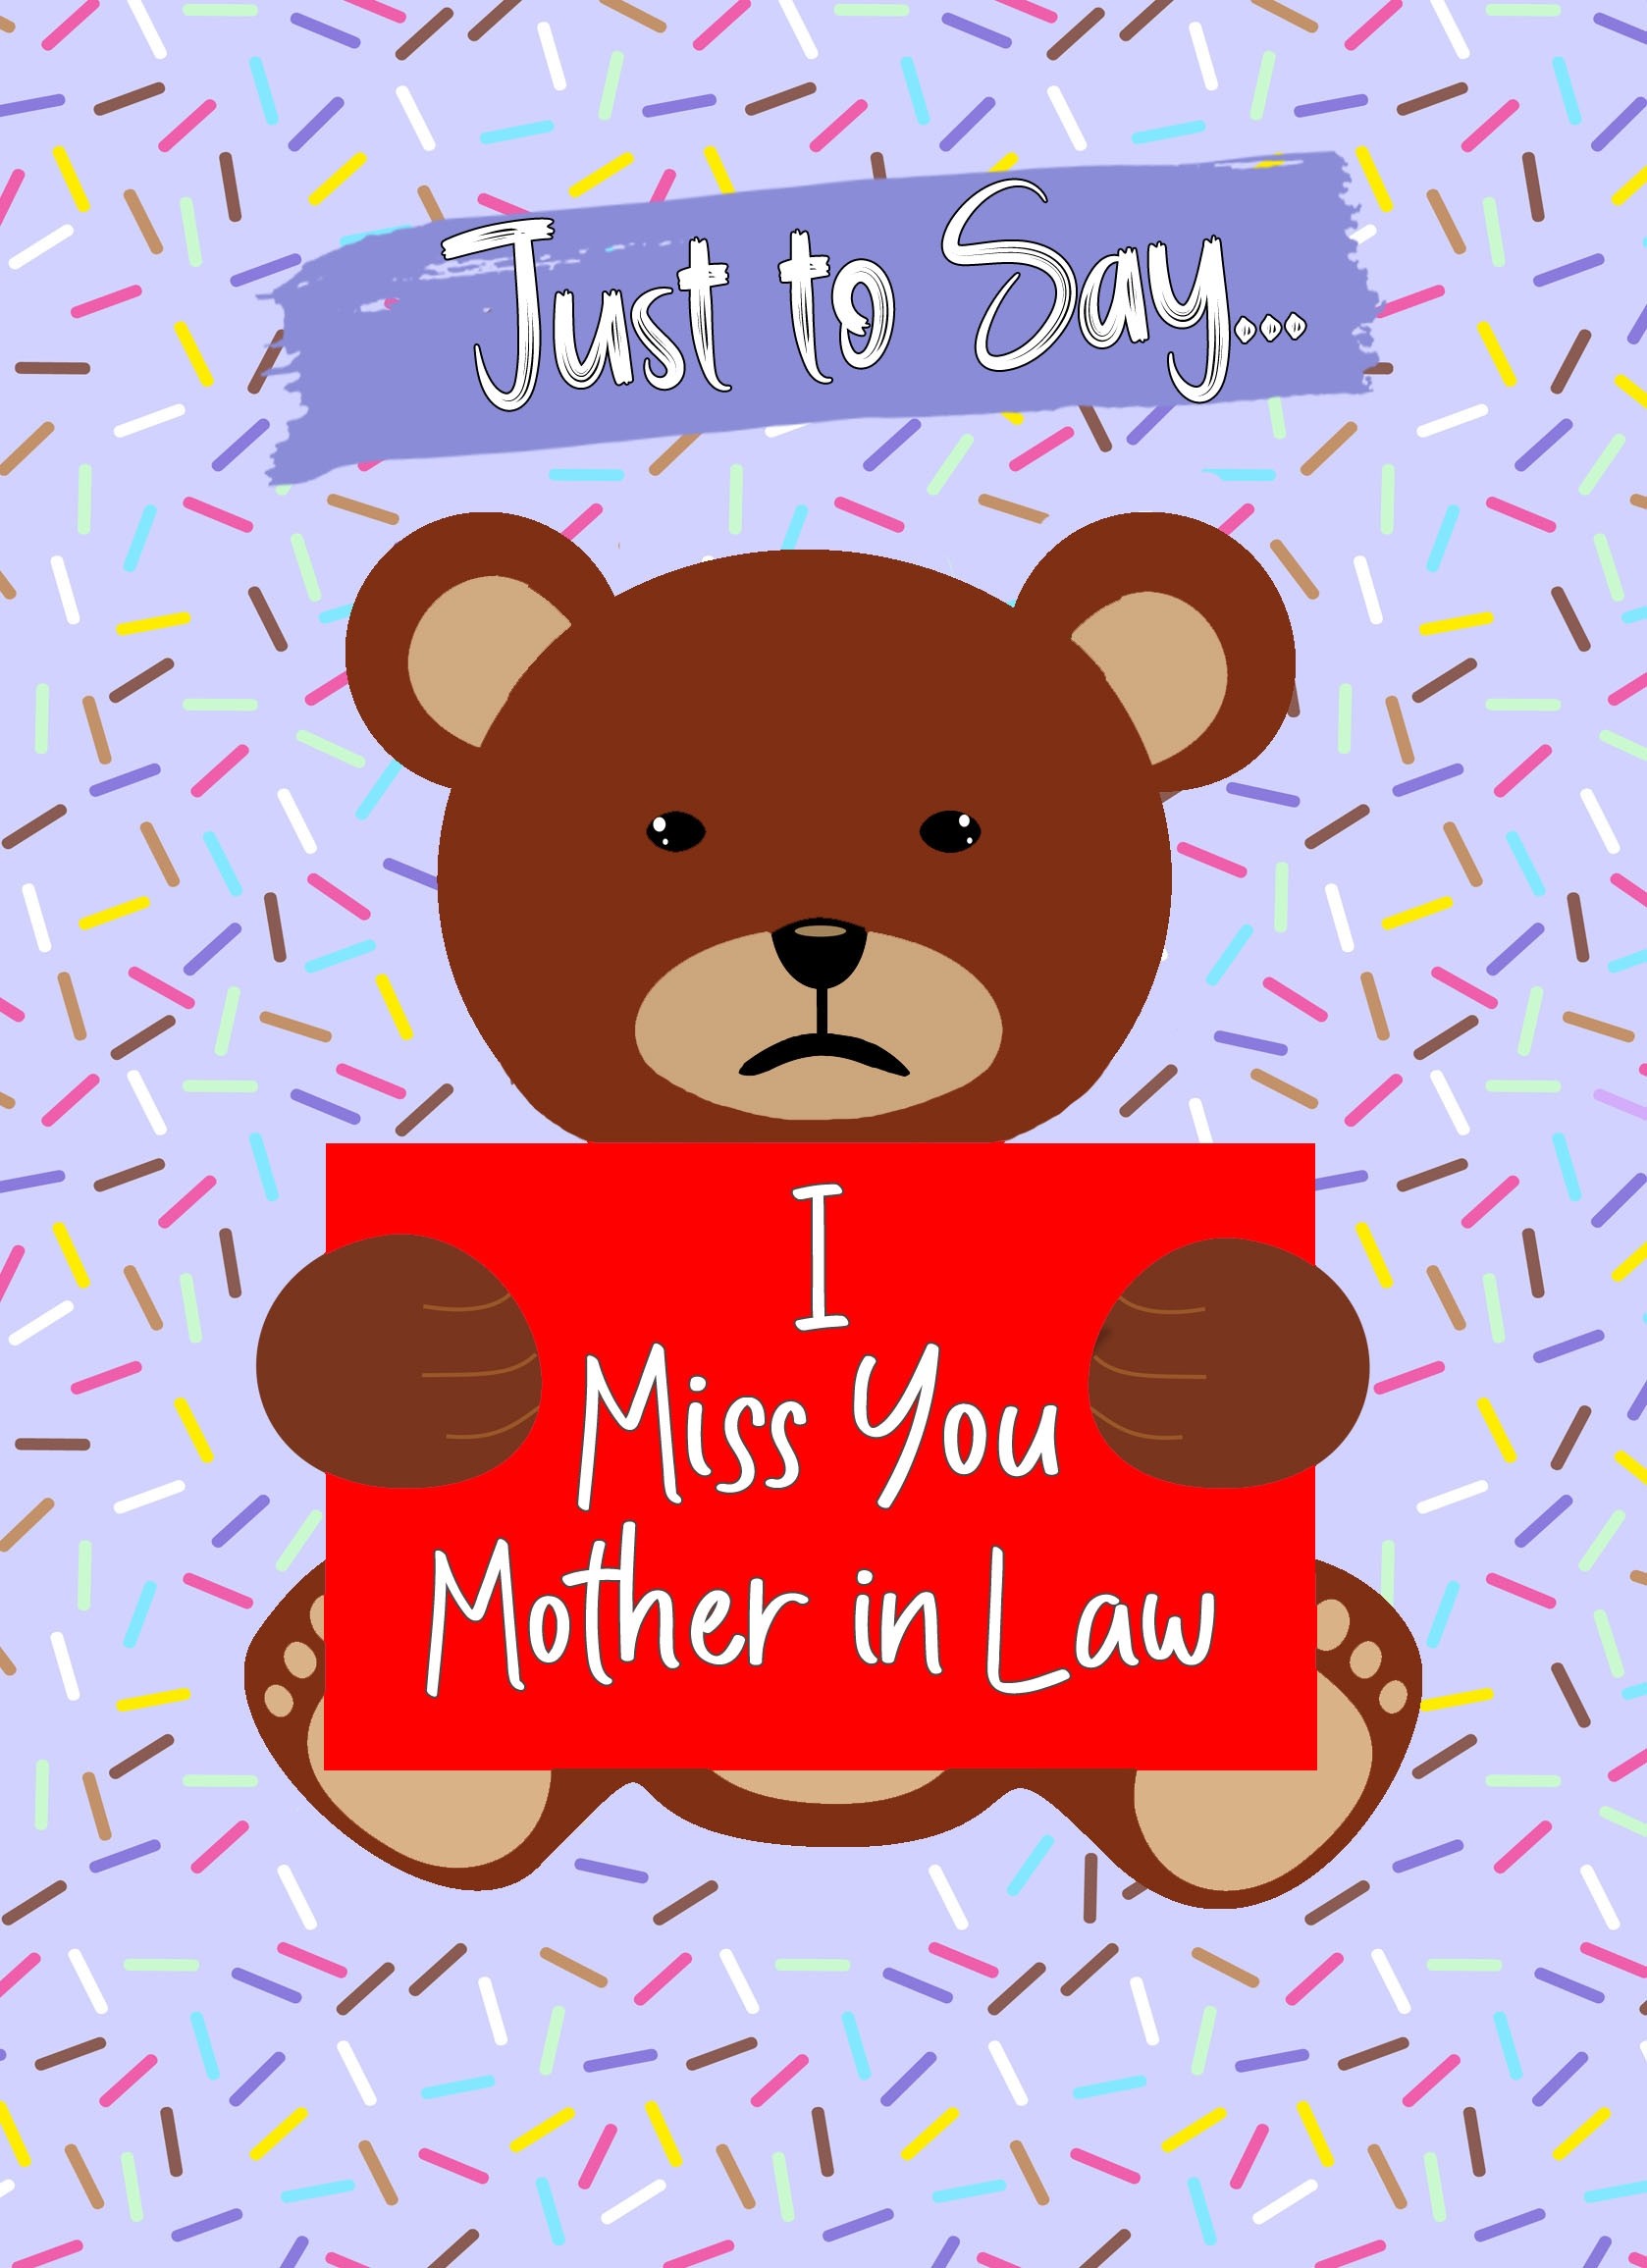 Missing You Card For Mother in Law (Bear)